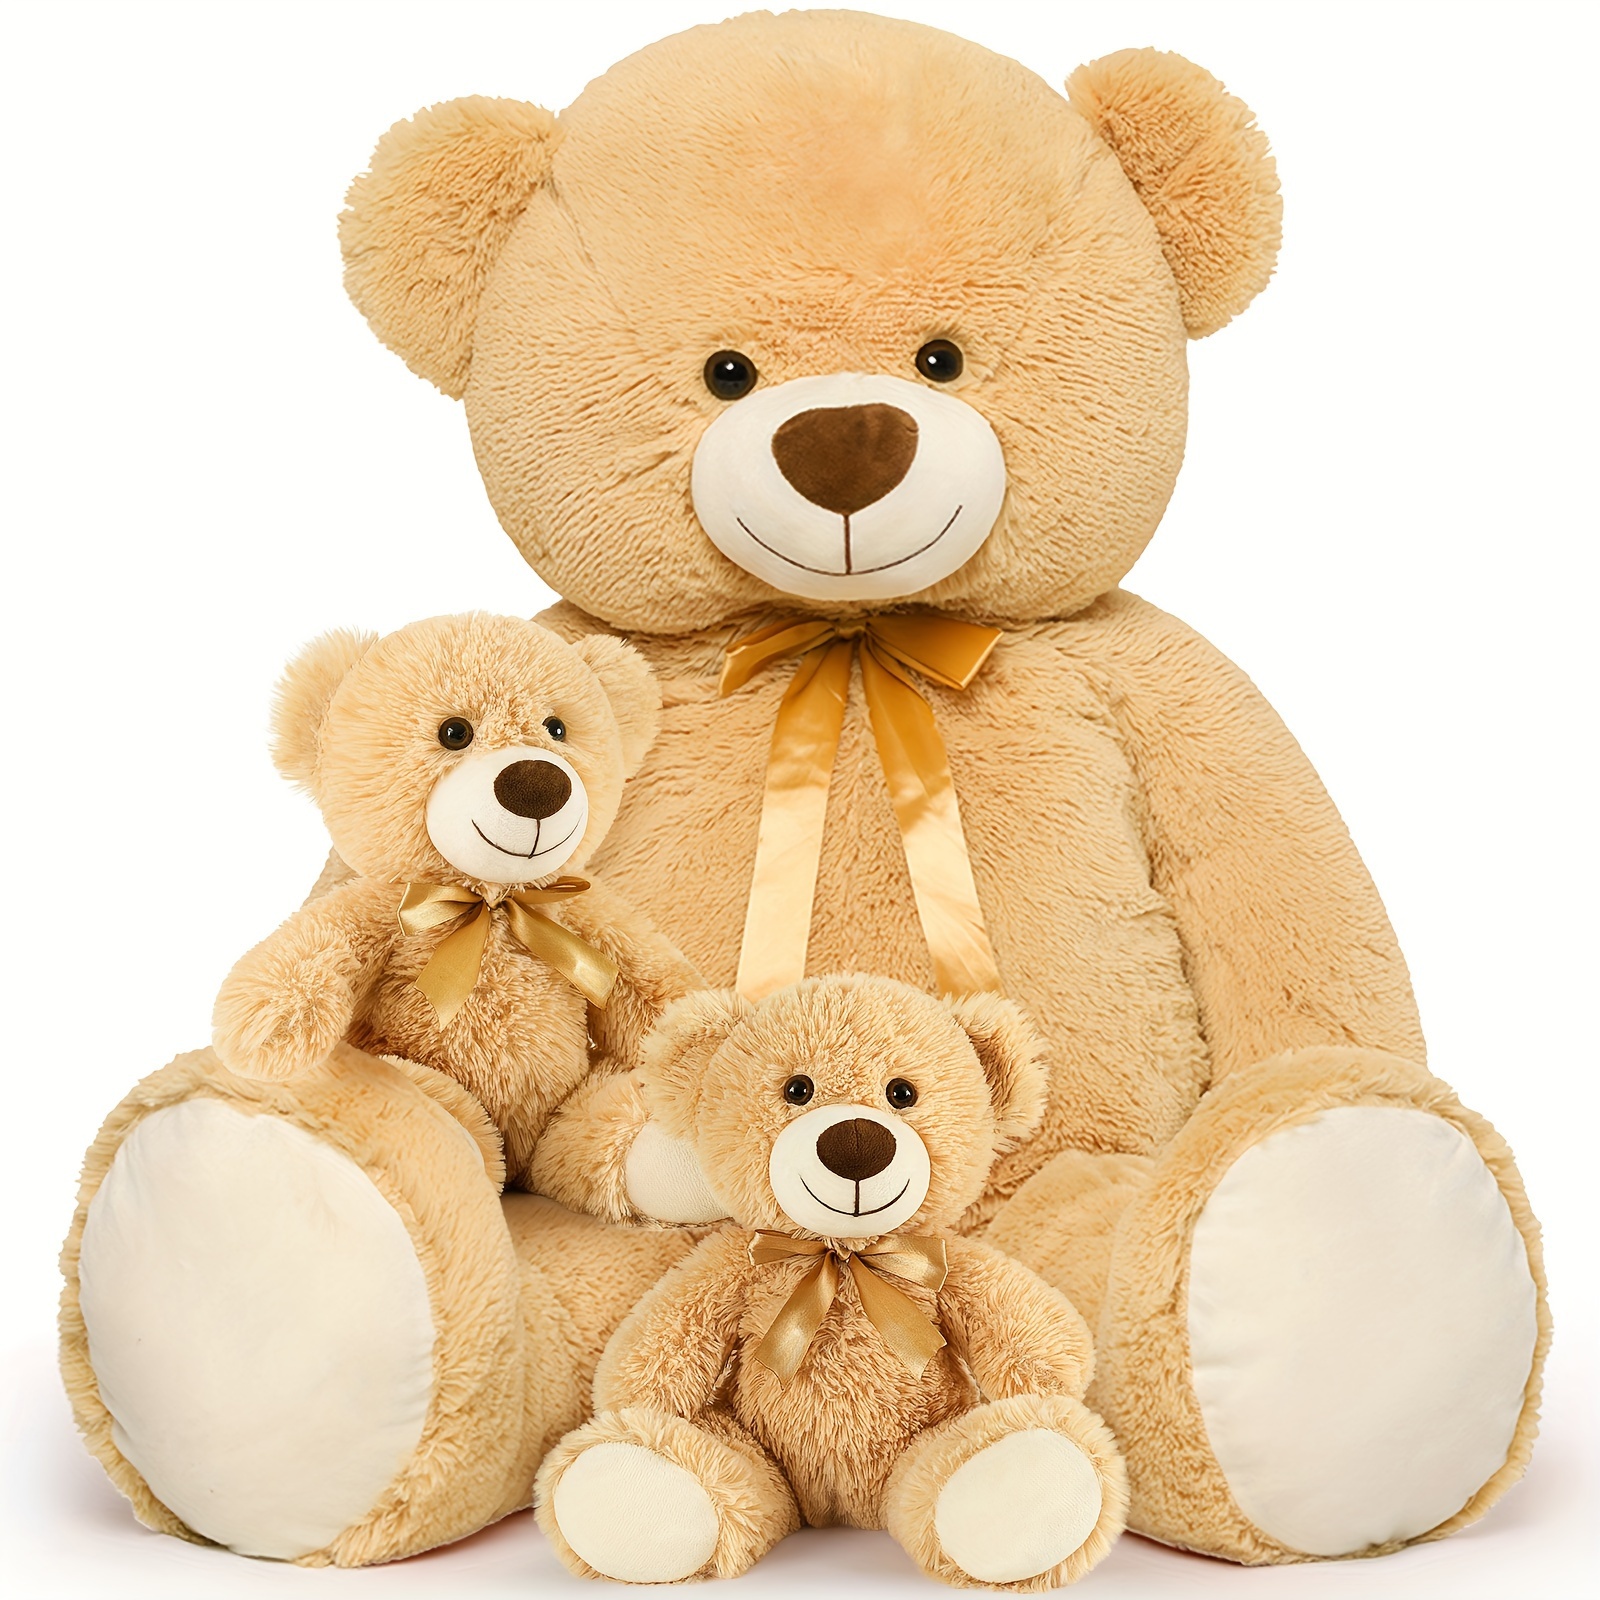 

Giant Teddy Bears With Babies, 39 Inch Large Mom And 2 Baby Bears For Baby Shower, Big Bear Stuffed Plush For Christmas, Valentine's Day